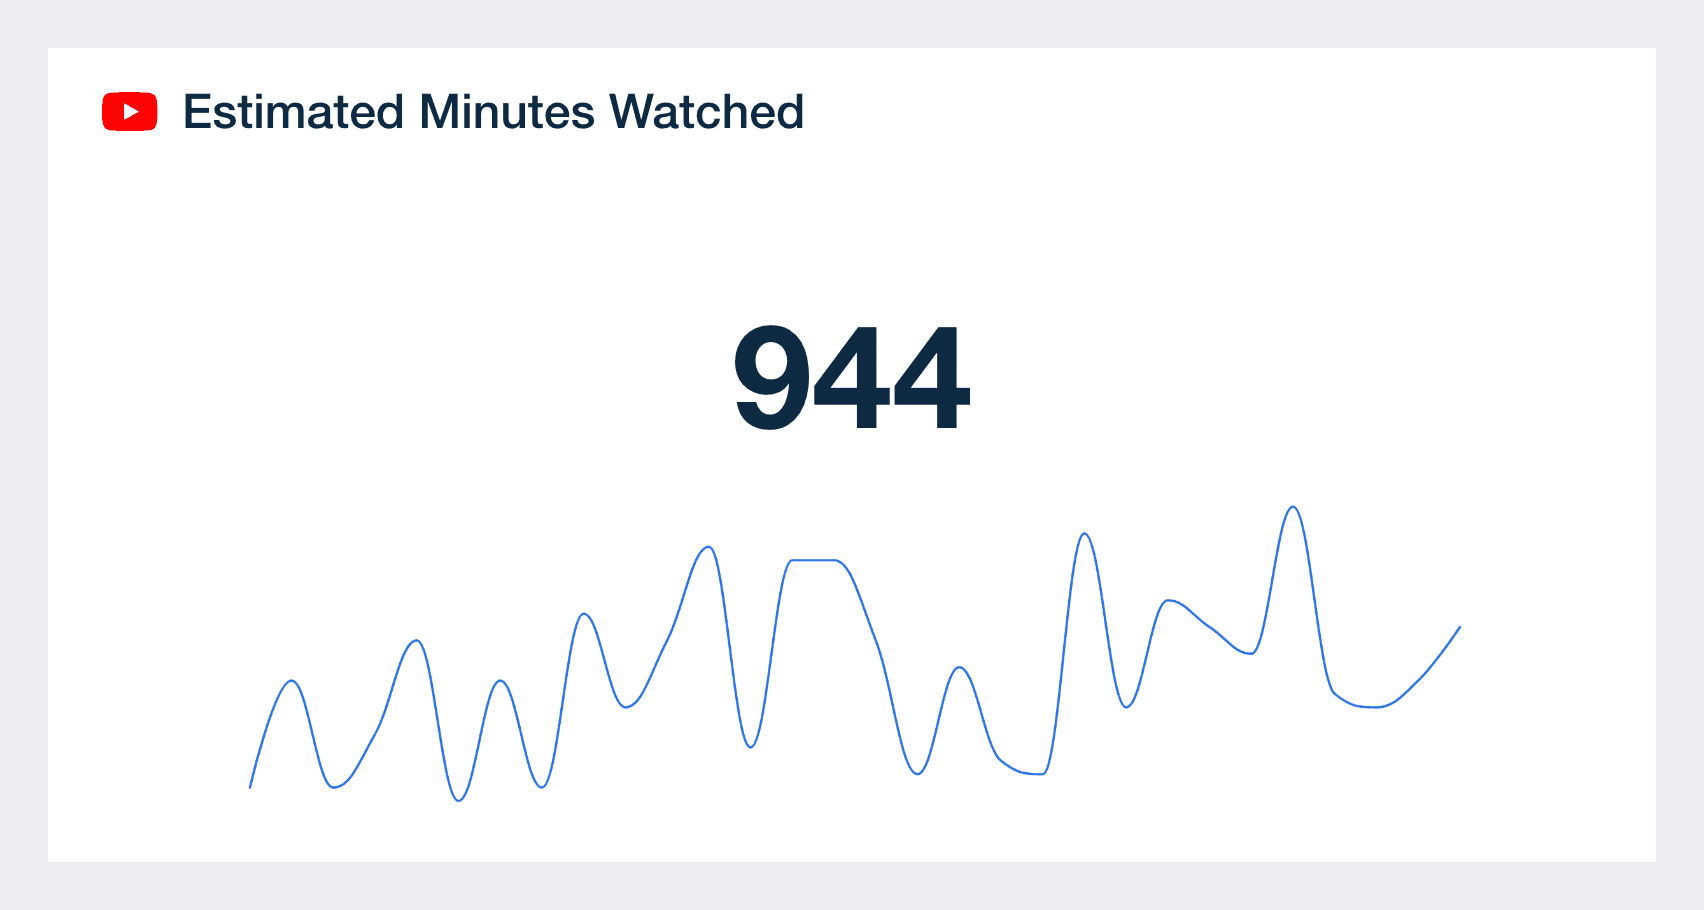 YouTube Estimated Minutes Watched on Dashboard